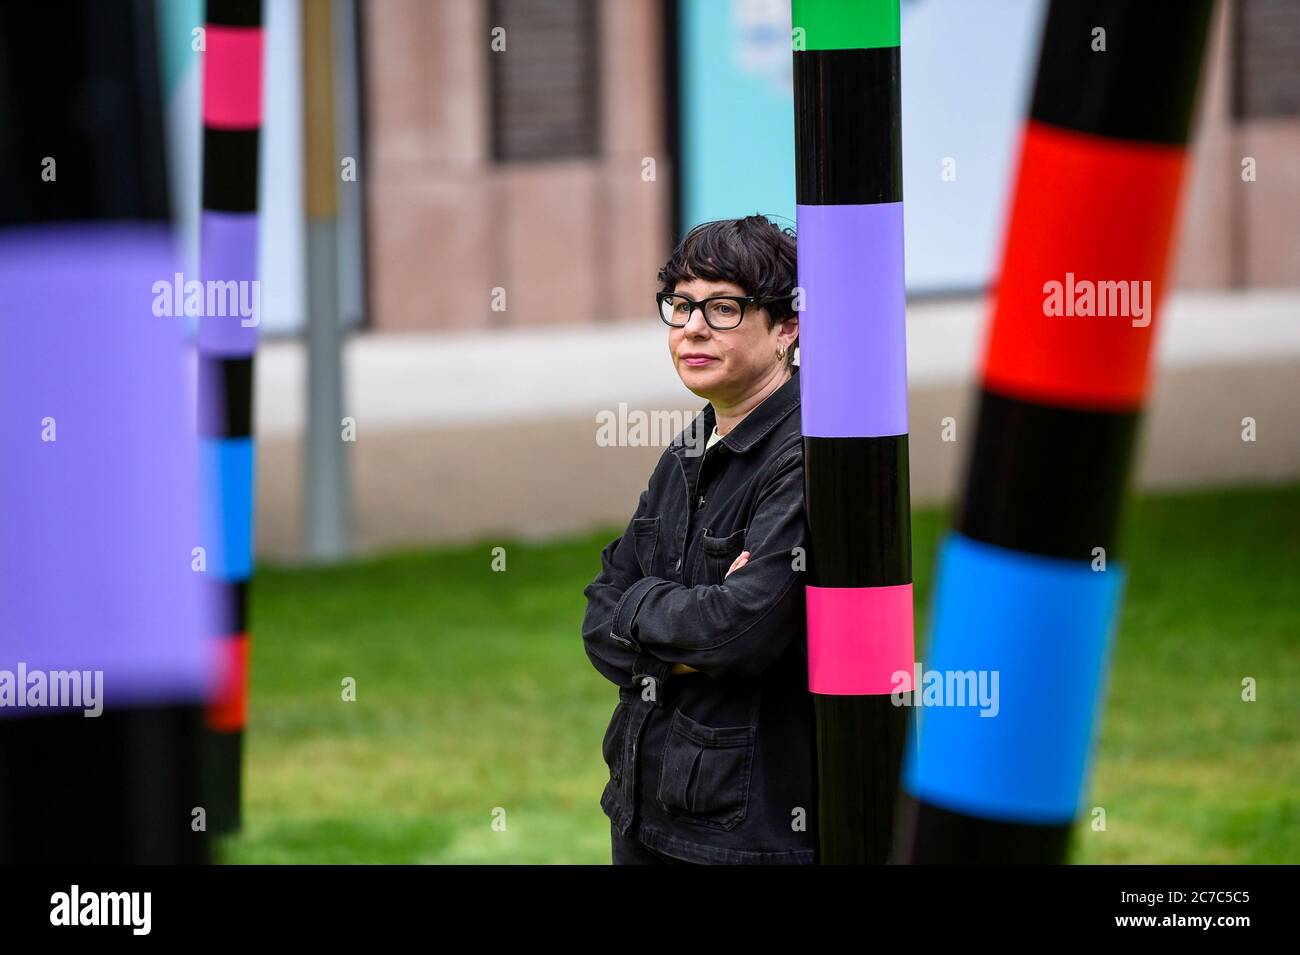 London, UK.  16 July 2020. Major contemporary London-based, Irish artist Eva Rothschild poses at the unveiling of her work 'My World and Your World.  The new 16m high, public sculpture in Lewis Cubitt Park in King's Cross resembles a lightning bolt, painted in black, purple, pink, orange, green and red stripes.  The coronavirus lockdown caused the April 2020 launch to be postponed, but the unveiling has been able to go ahead now that certain lockdown restrictions have been eased by the UK government.  Credit: Stephen Chung / Alamy Live News Stock Photo